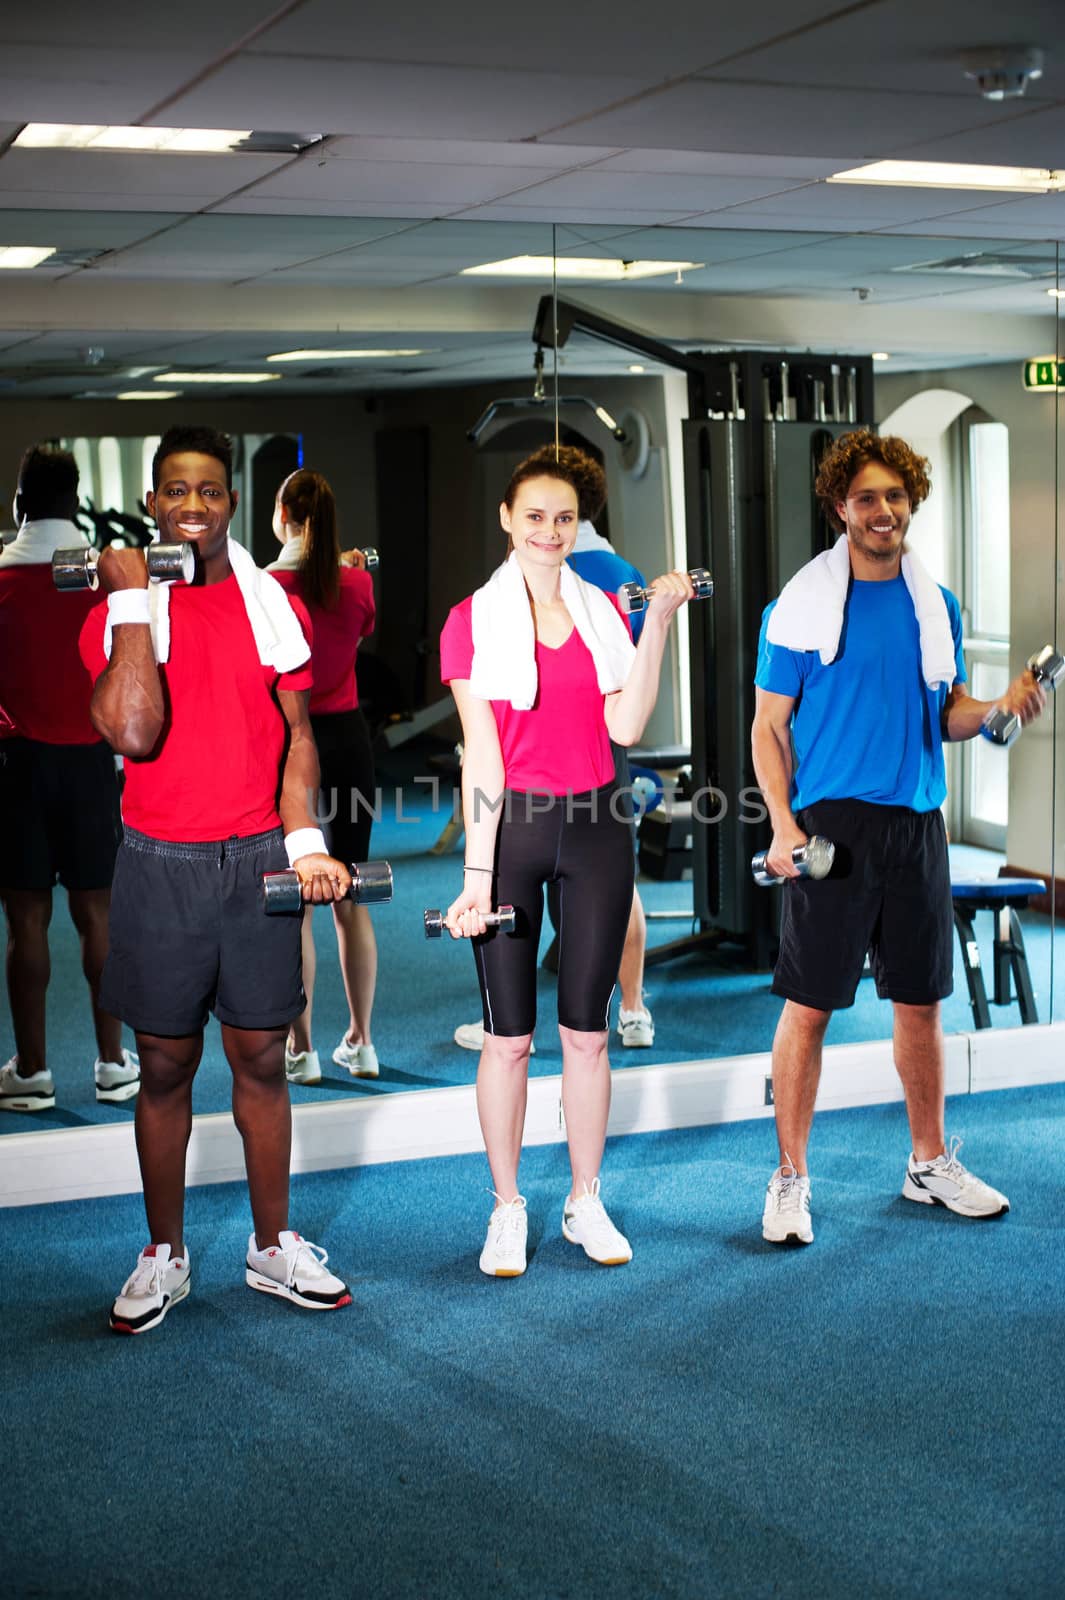 Group of people doing biceps exercise by stockyimages